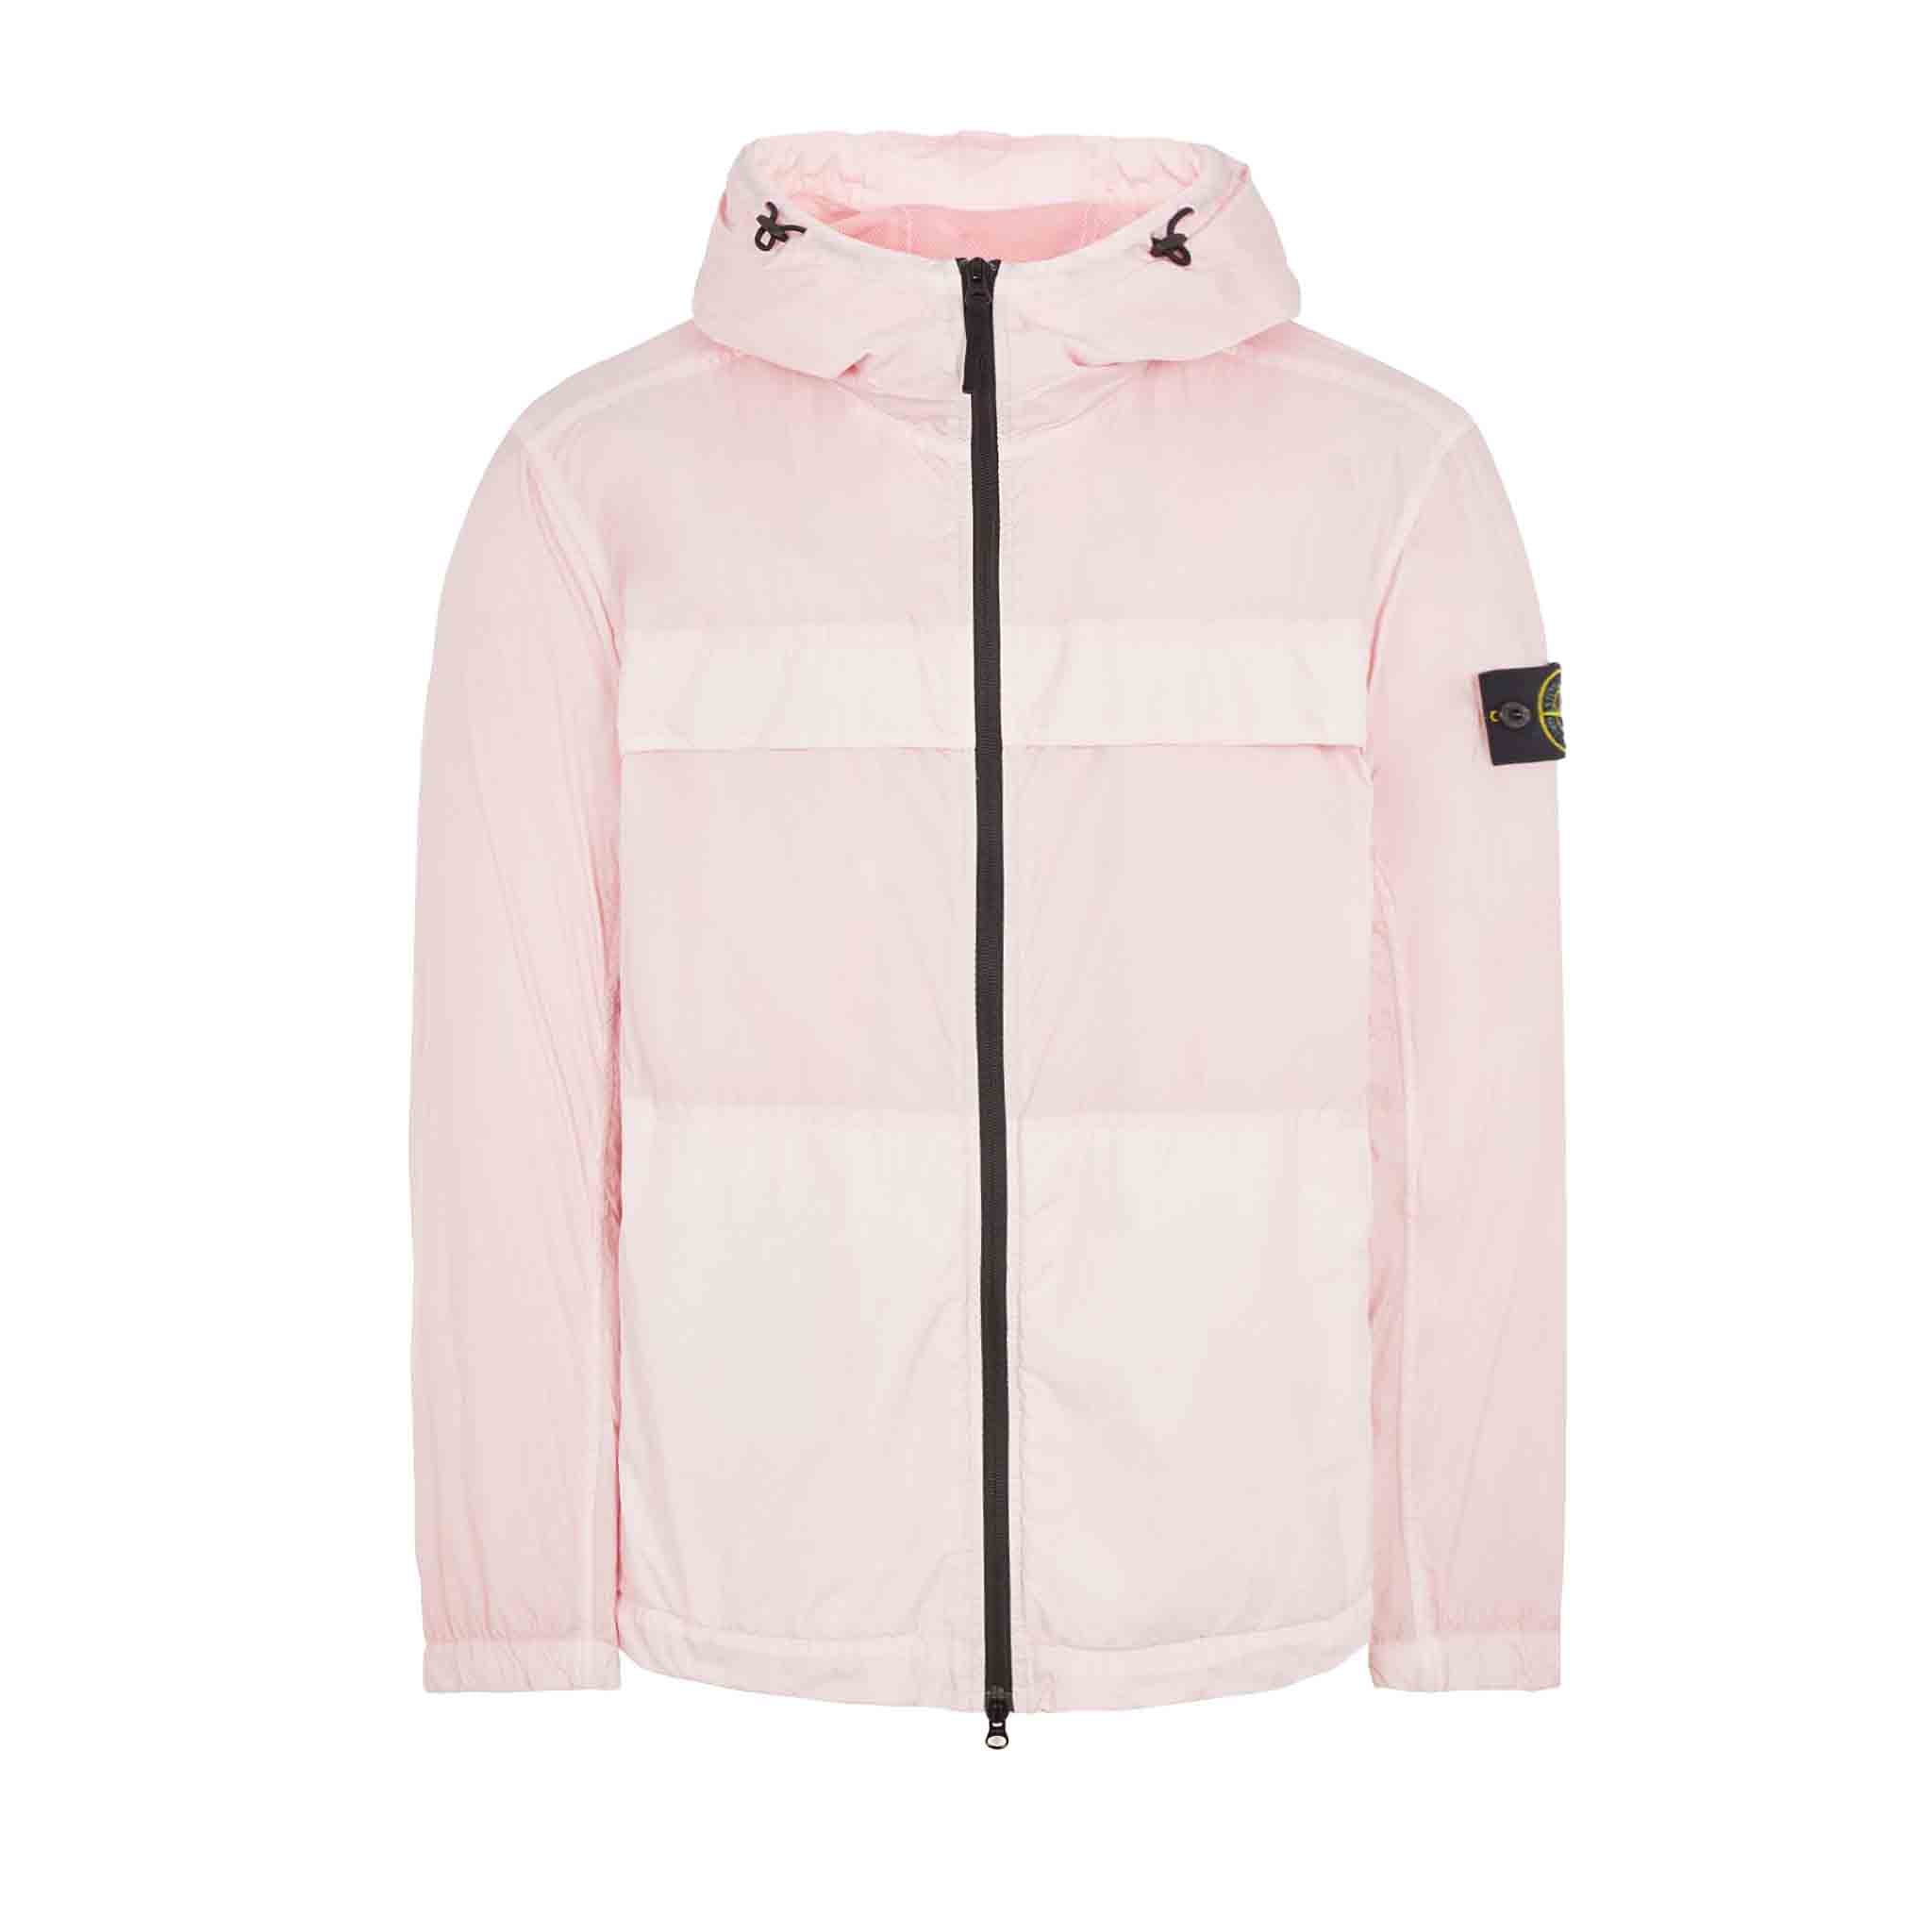 Stone Island Garment Dyed Crinkle Reps R-NY Hooded Jacket in Pink